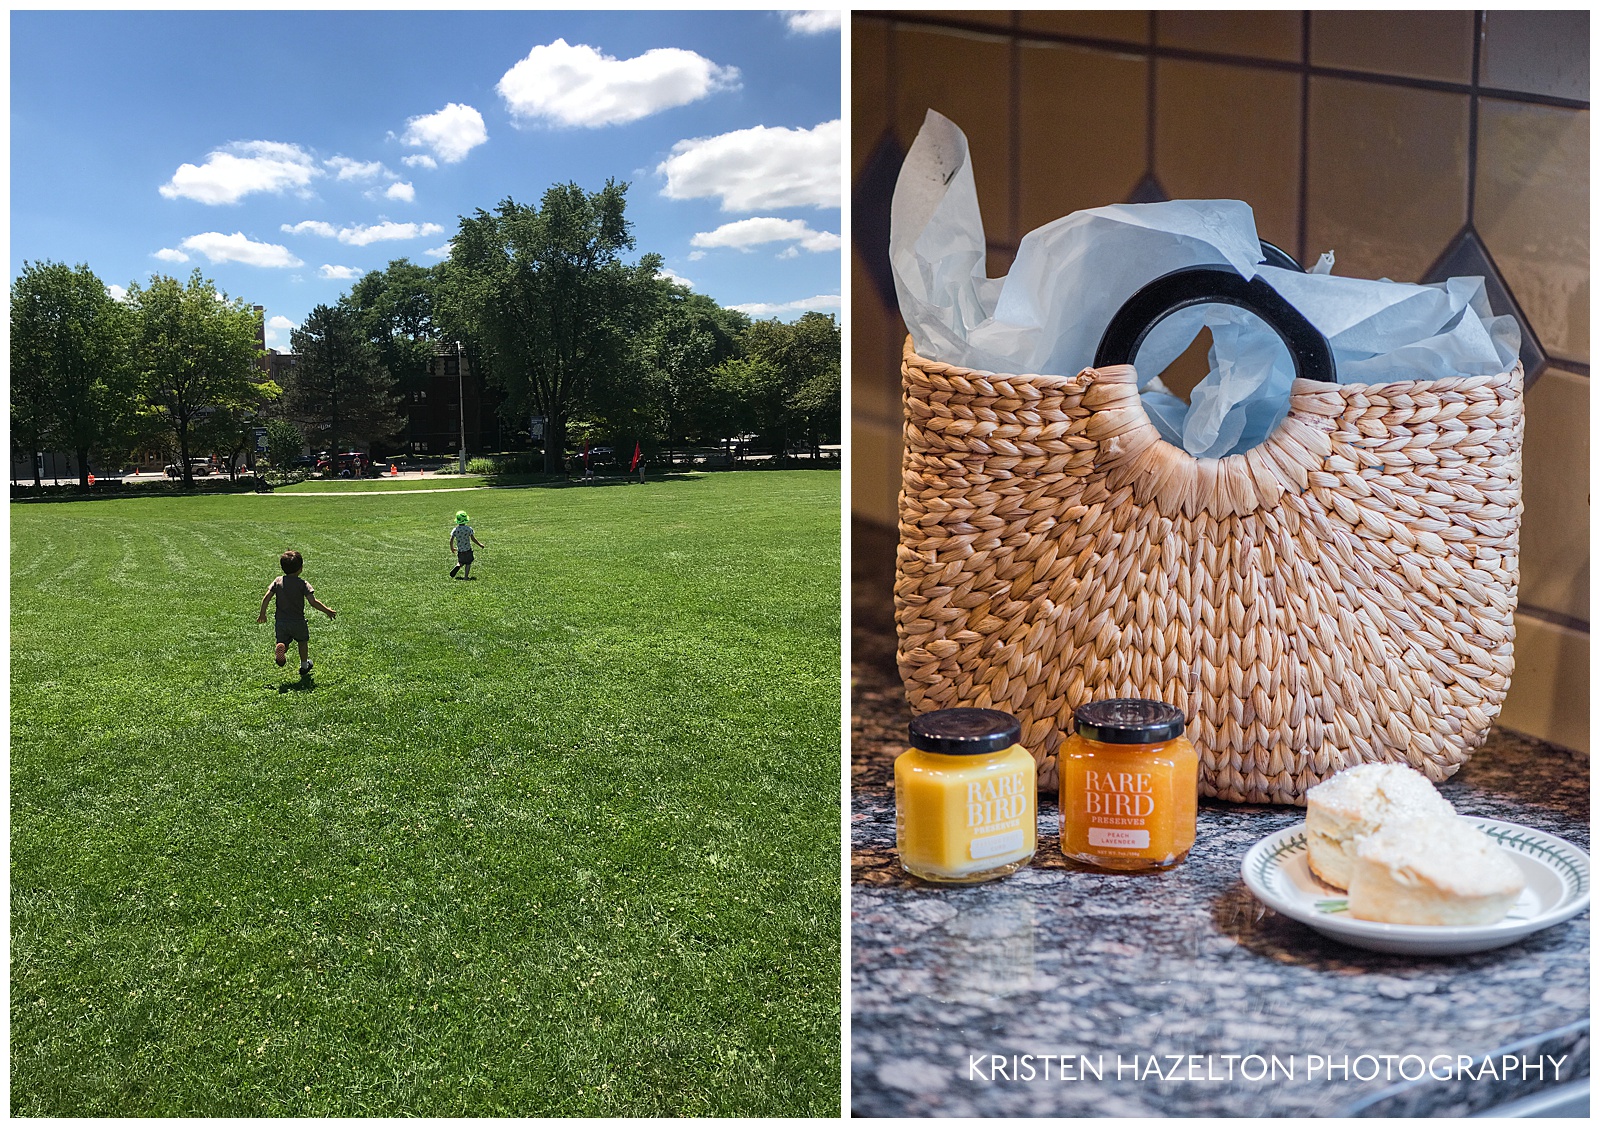 Collage of two toddler boys running on lawn at Scoville Park, Oak Park, IL, and a seagrass basket with jam and scones from Rare Bird Preserves, Oak Park, IL